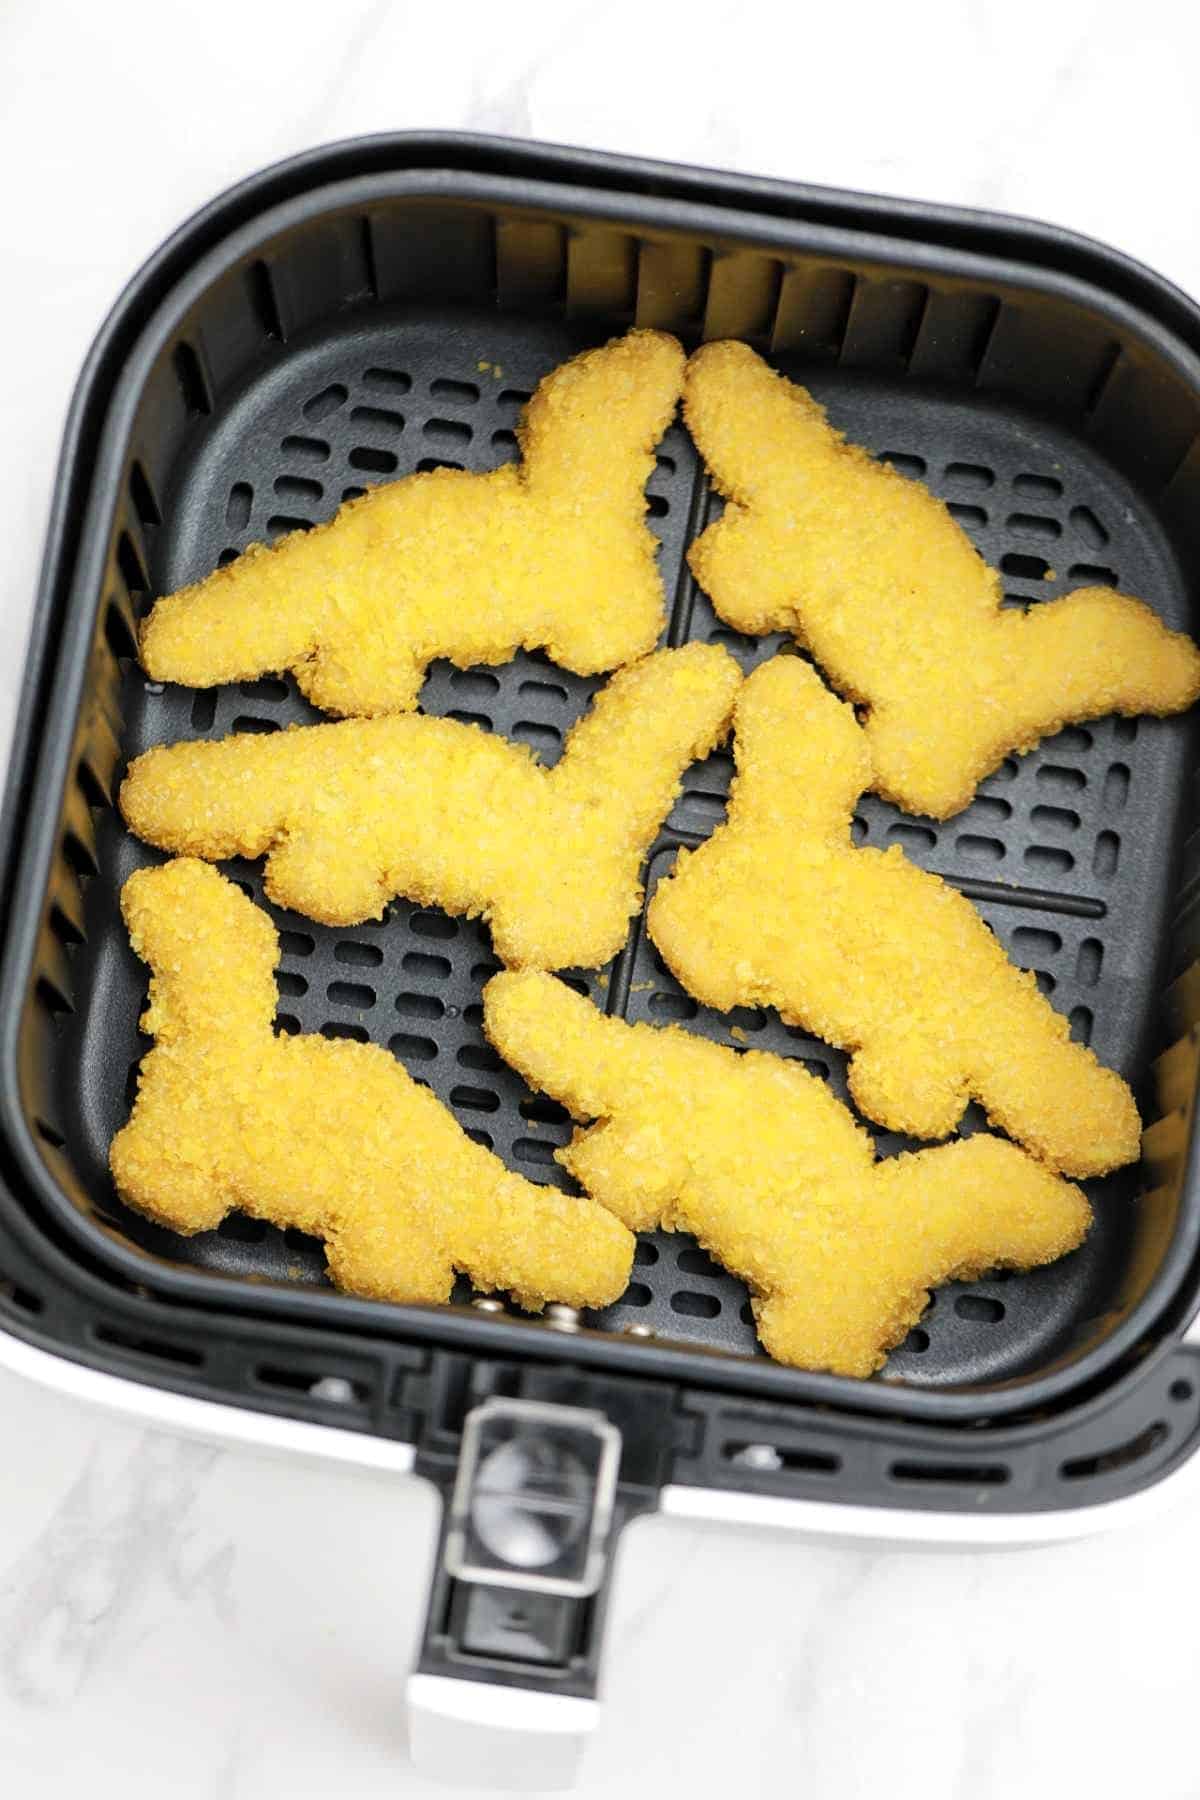 arranged in the air fryer basket in a single layer.